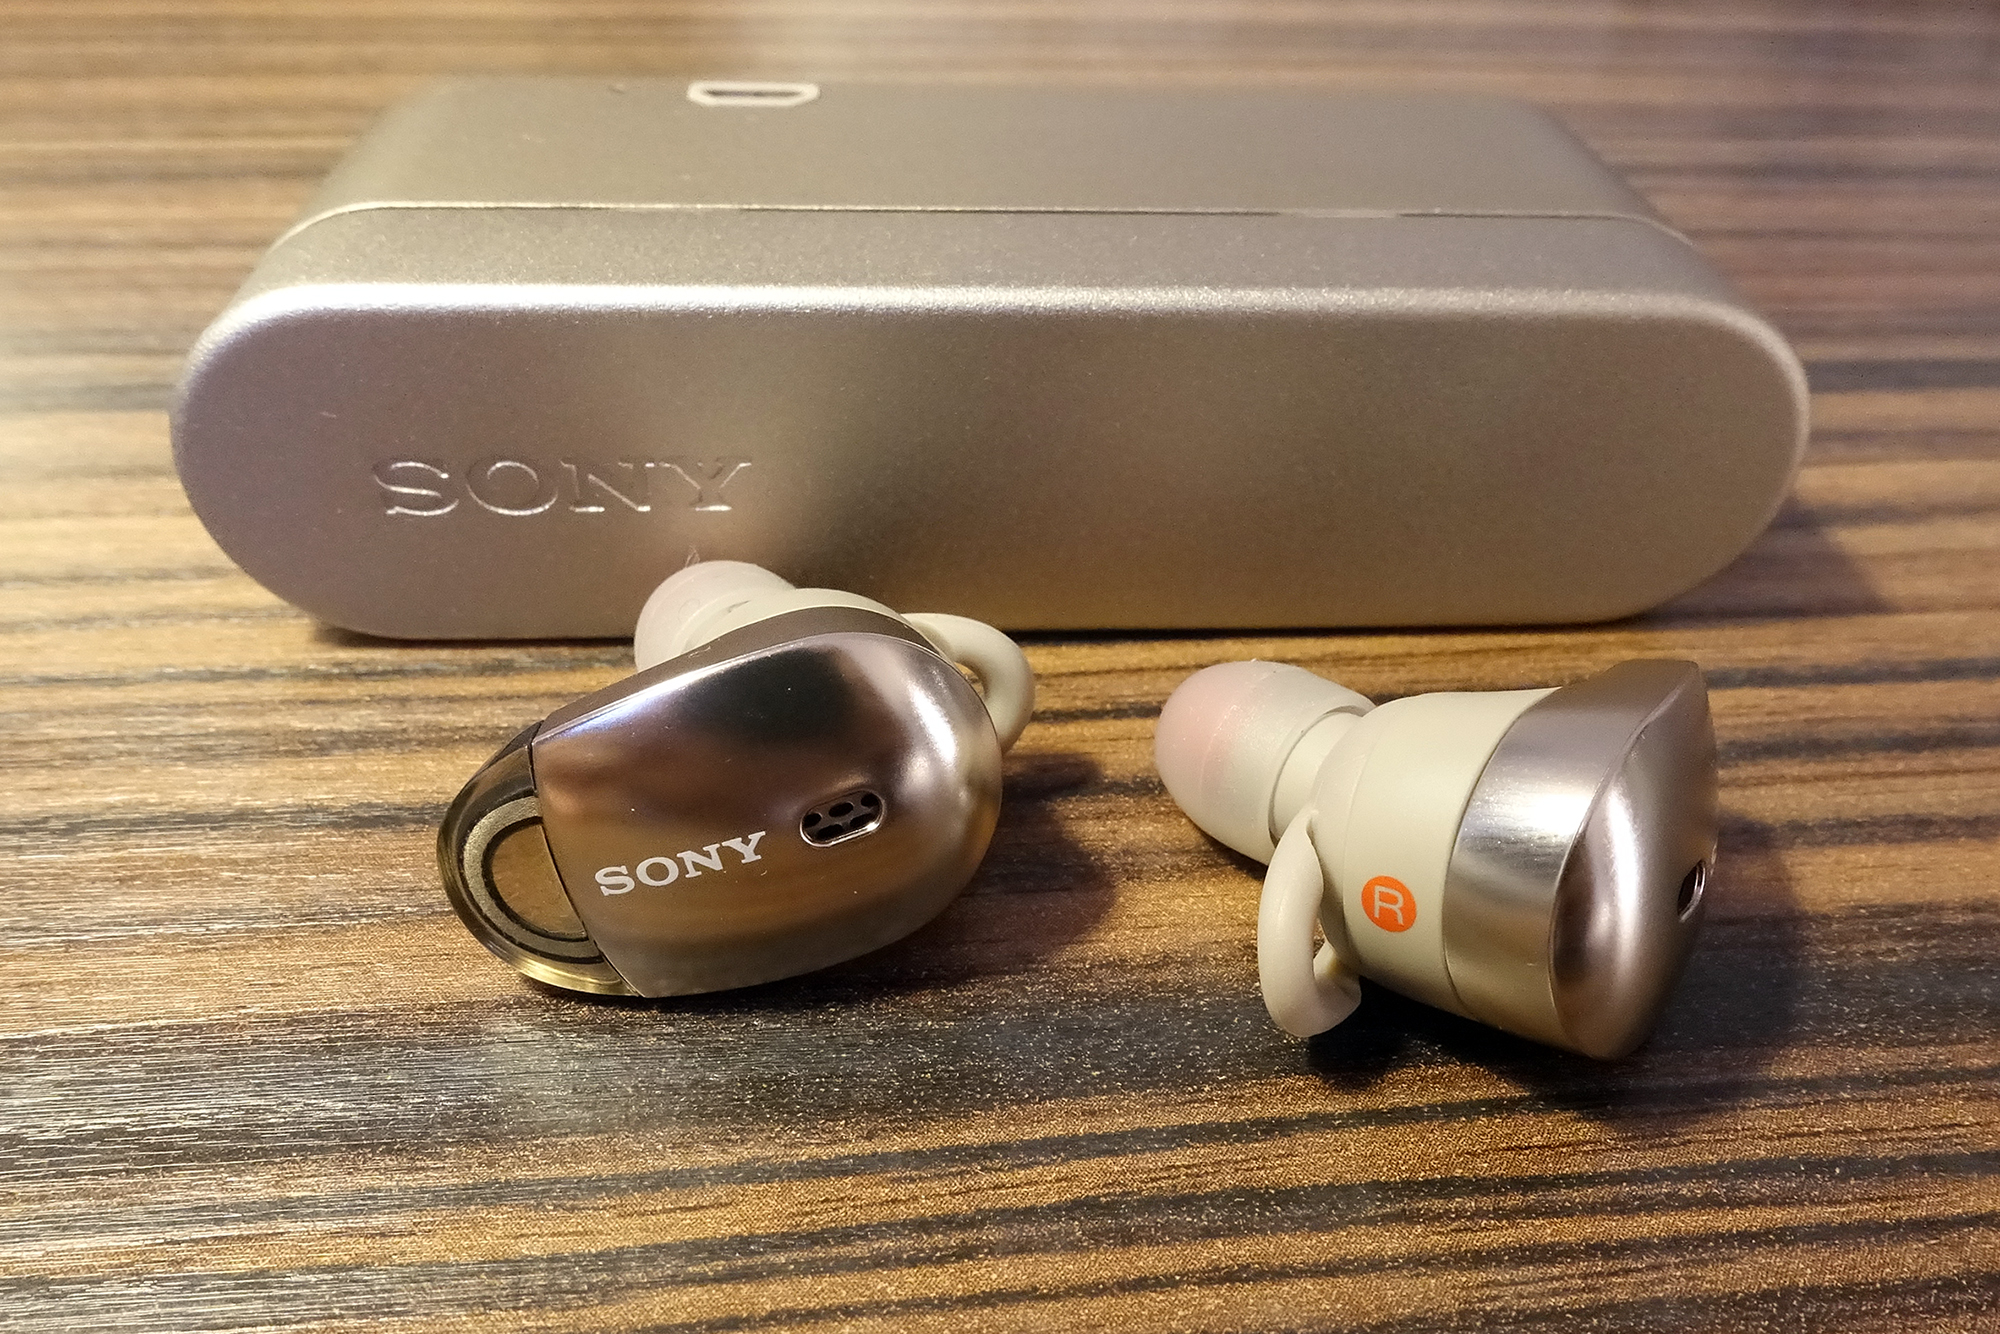 Best Apple Airpods 2 Alternatives 2019 cheap Sony Earbuds